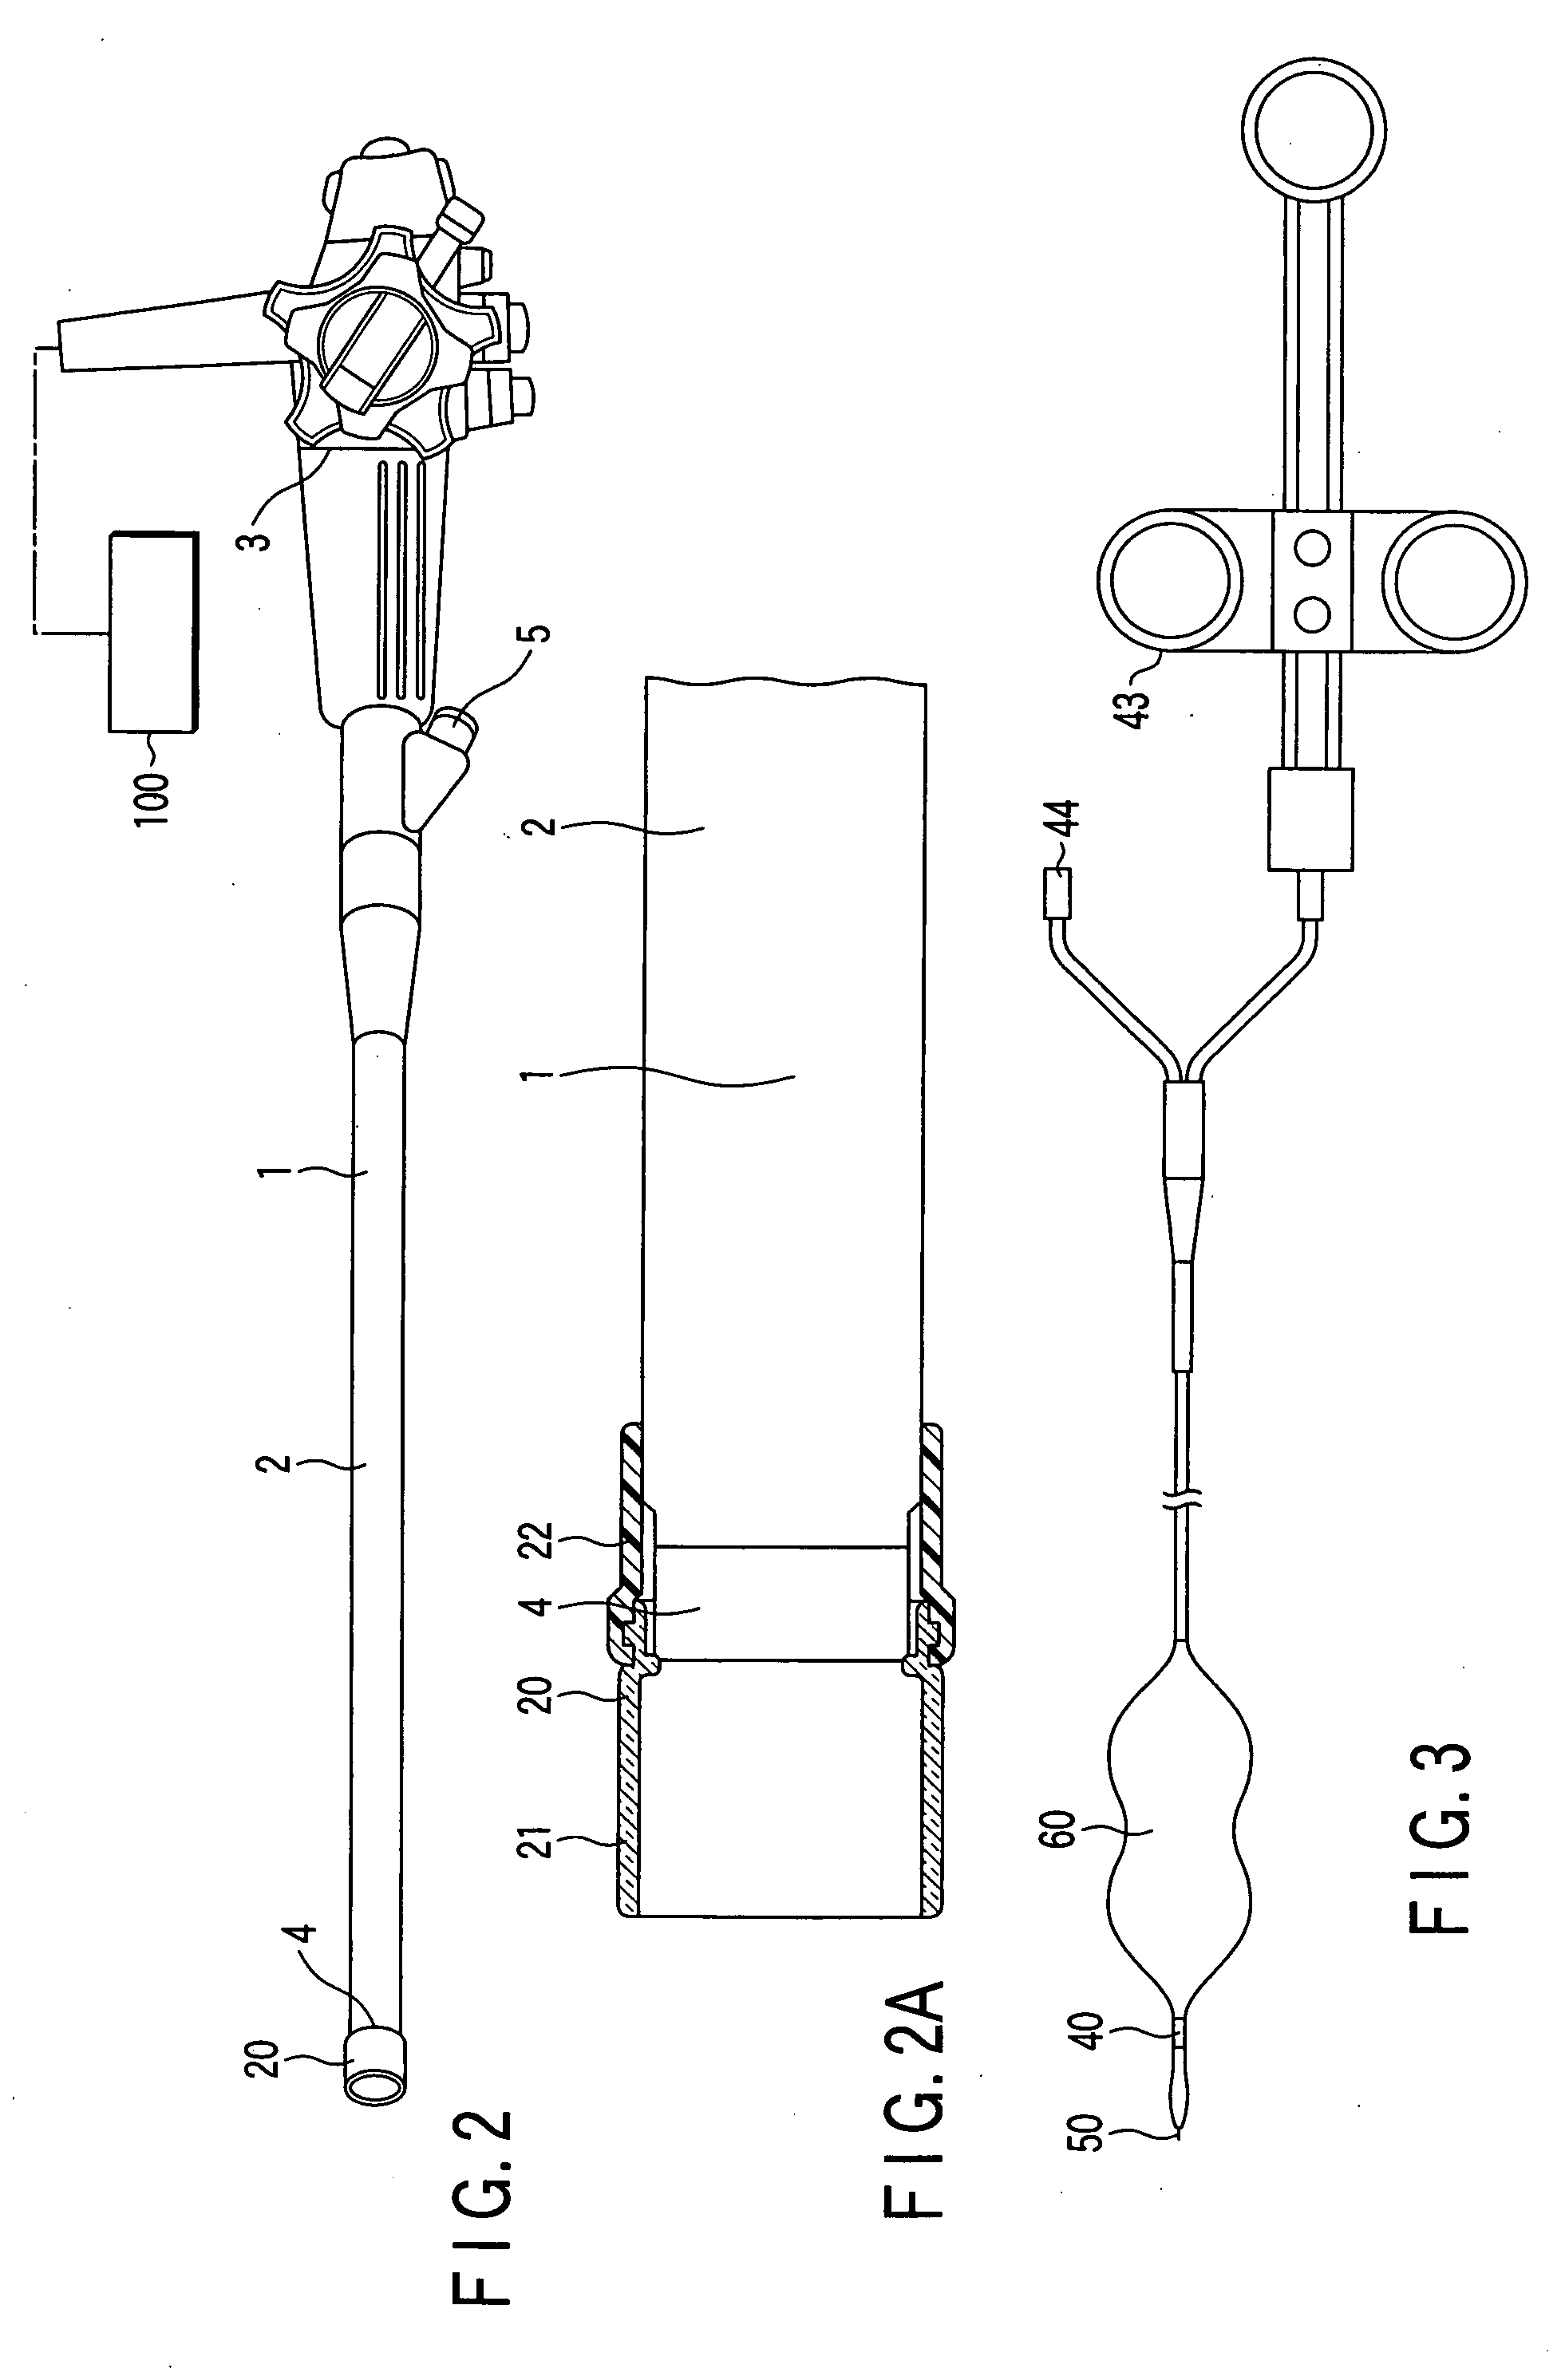 Endoscopic system for treating inside of body cavity